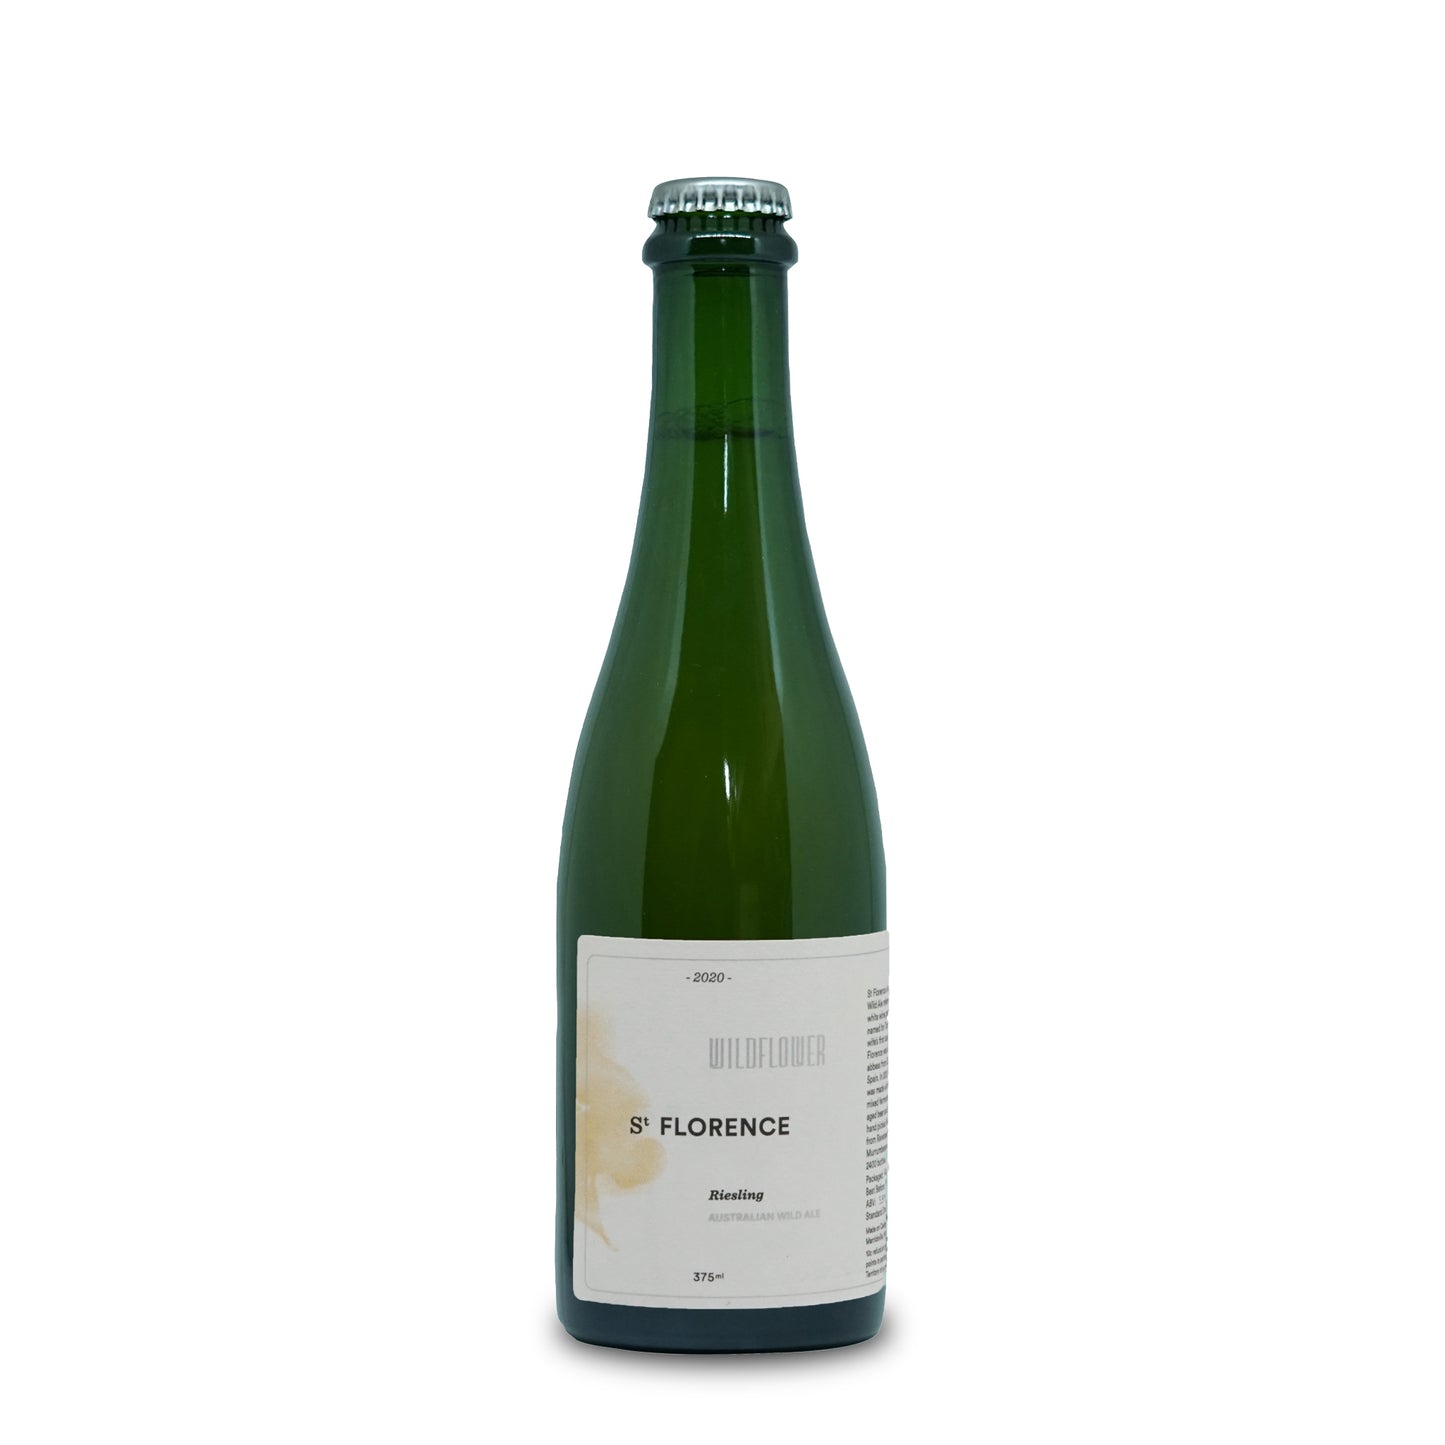 Wildflower St Florence 2020: Riesling